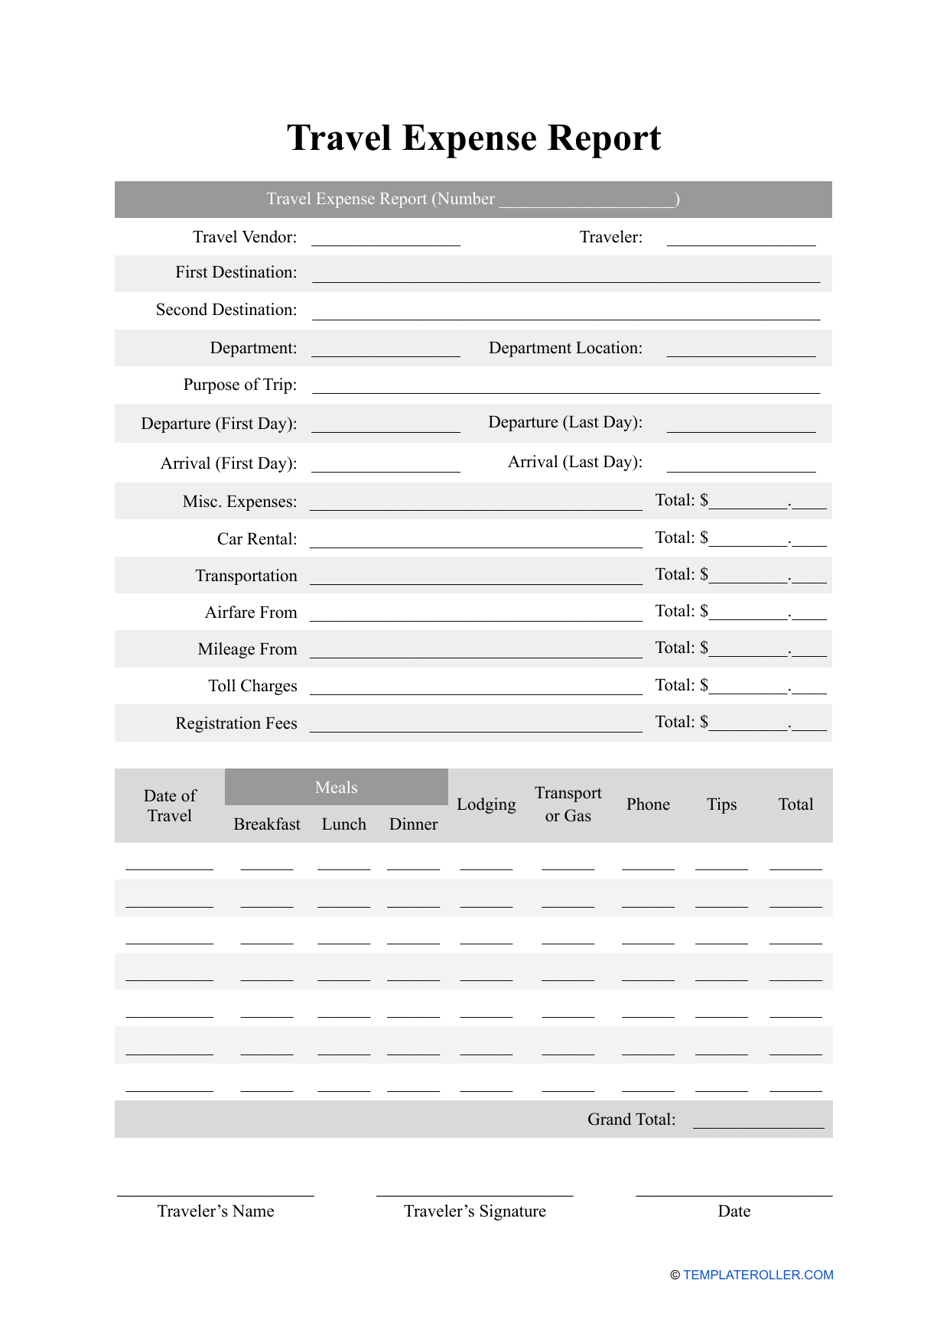 Travel Expense Report Template - Different Points, Page 1